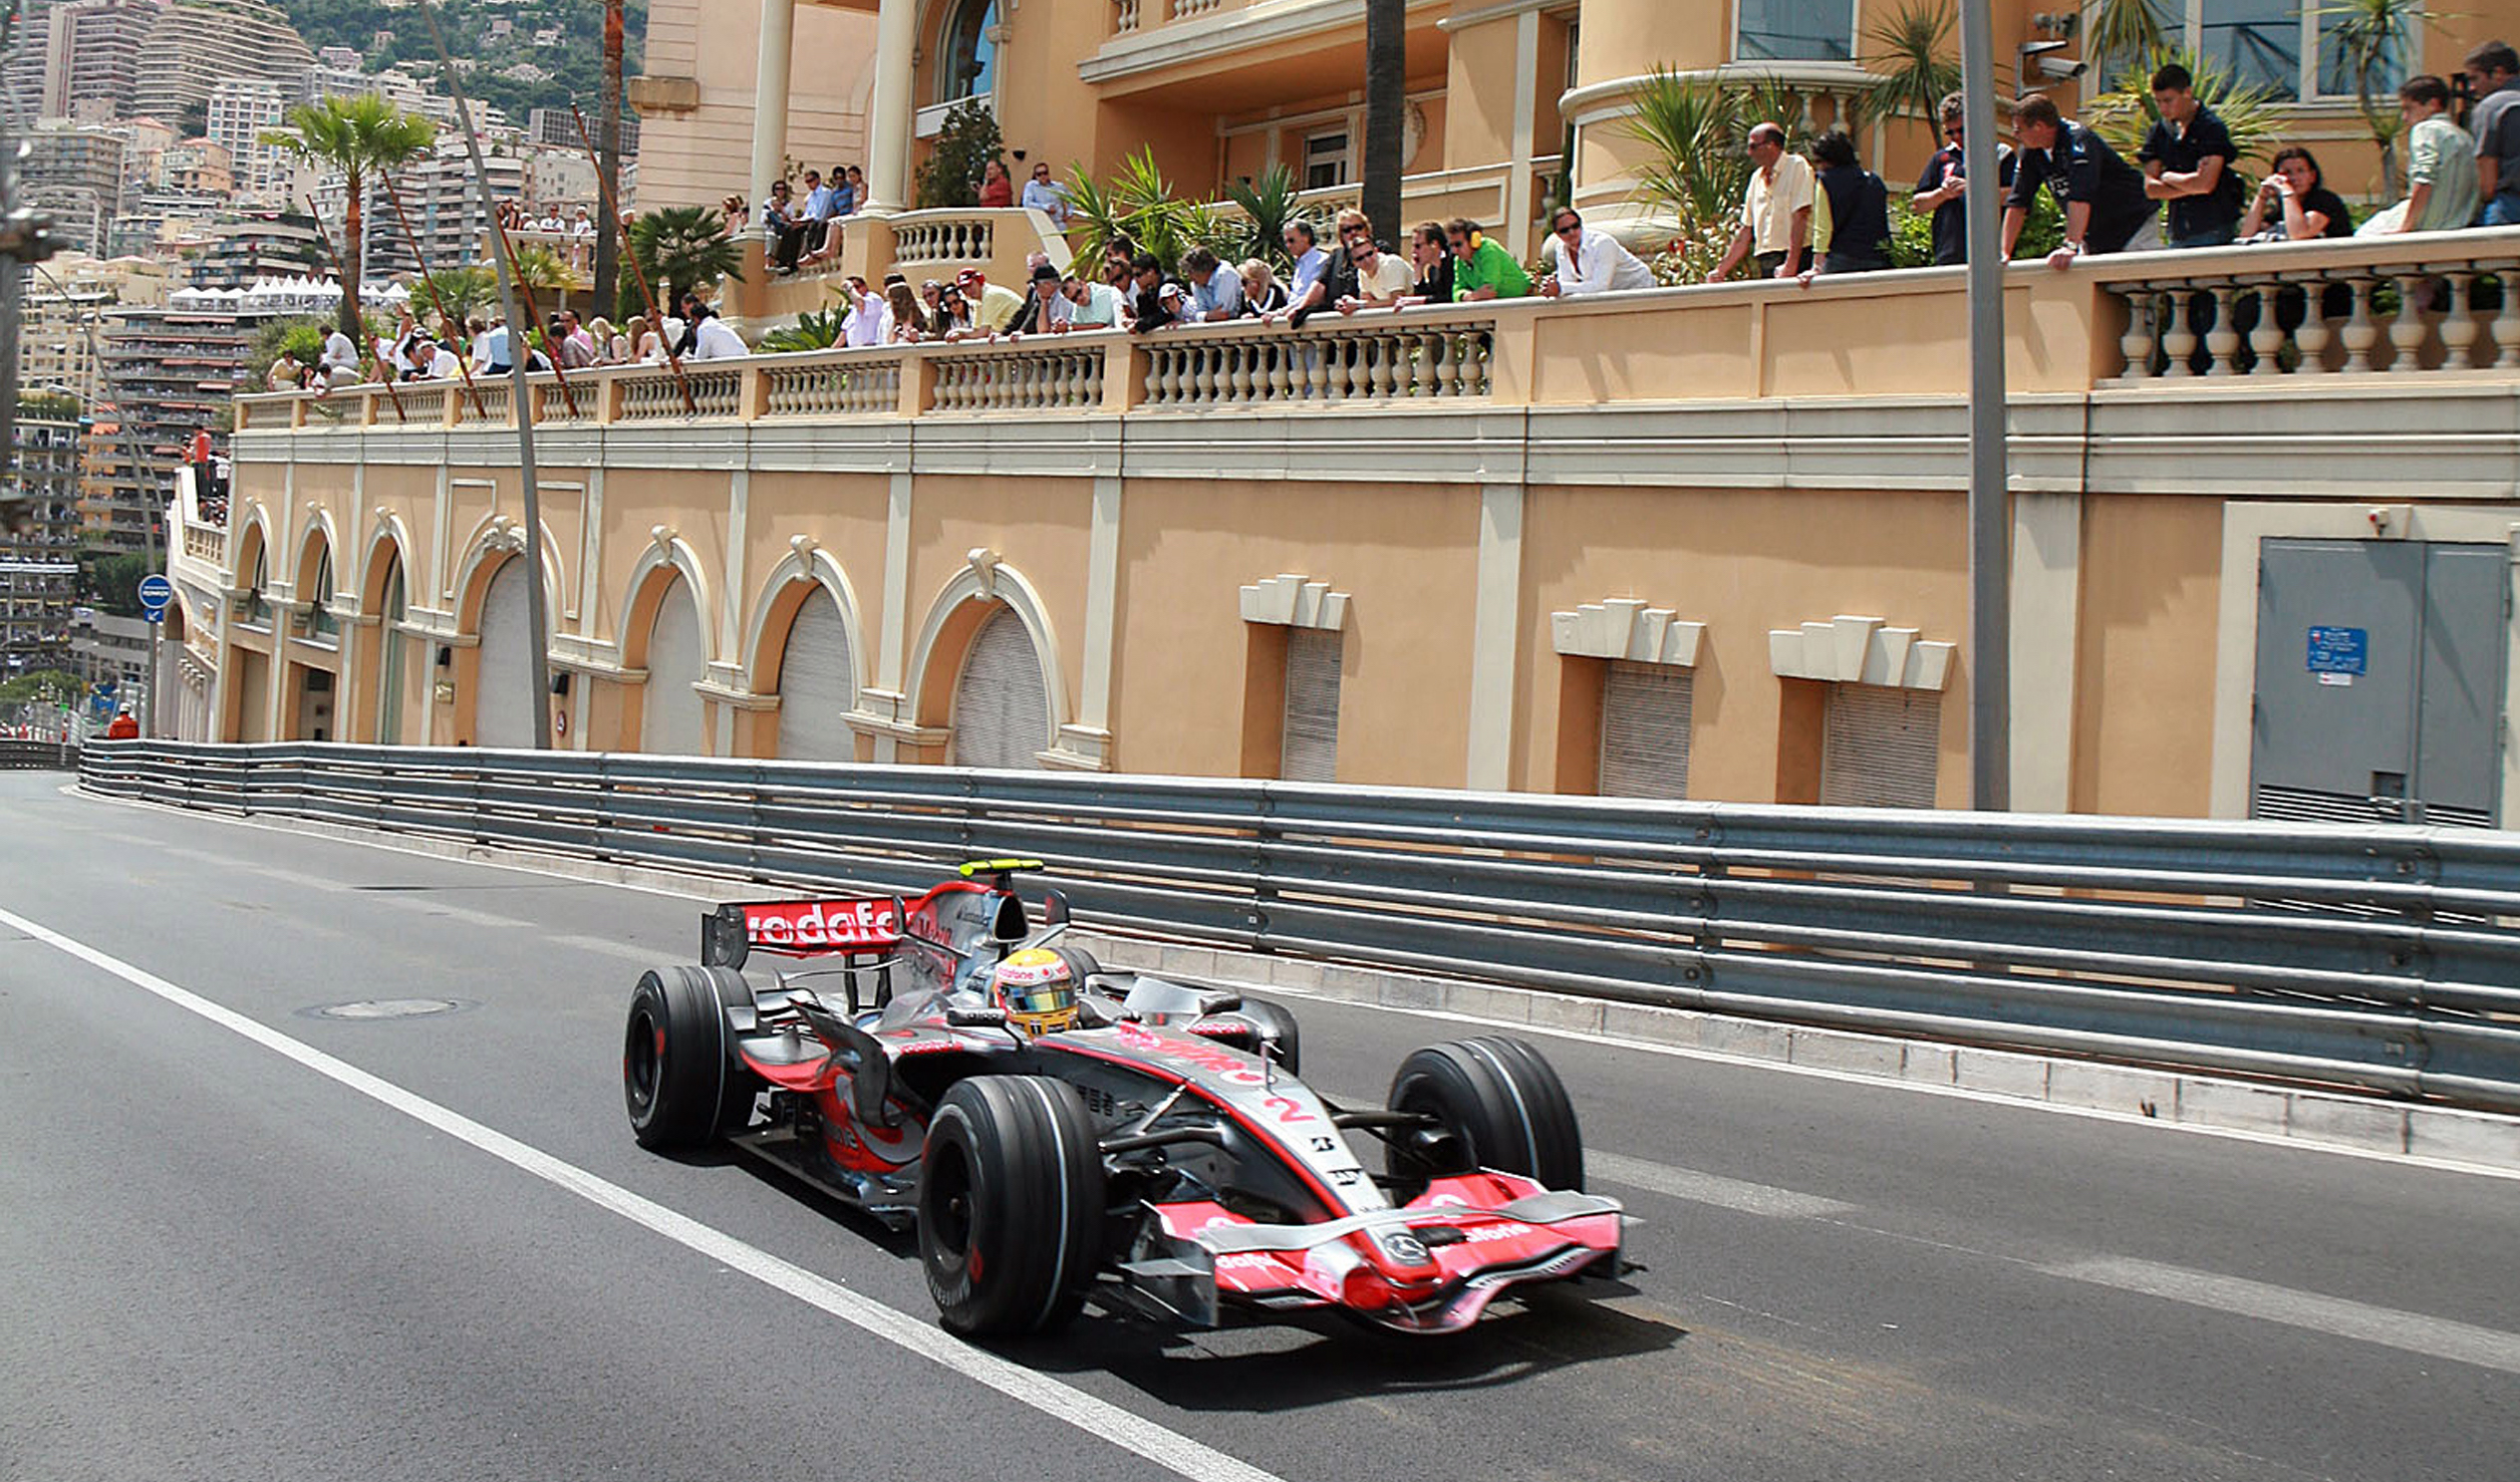 Monaco to host three grand prix in one month - Travel Weekly